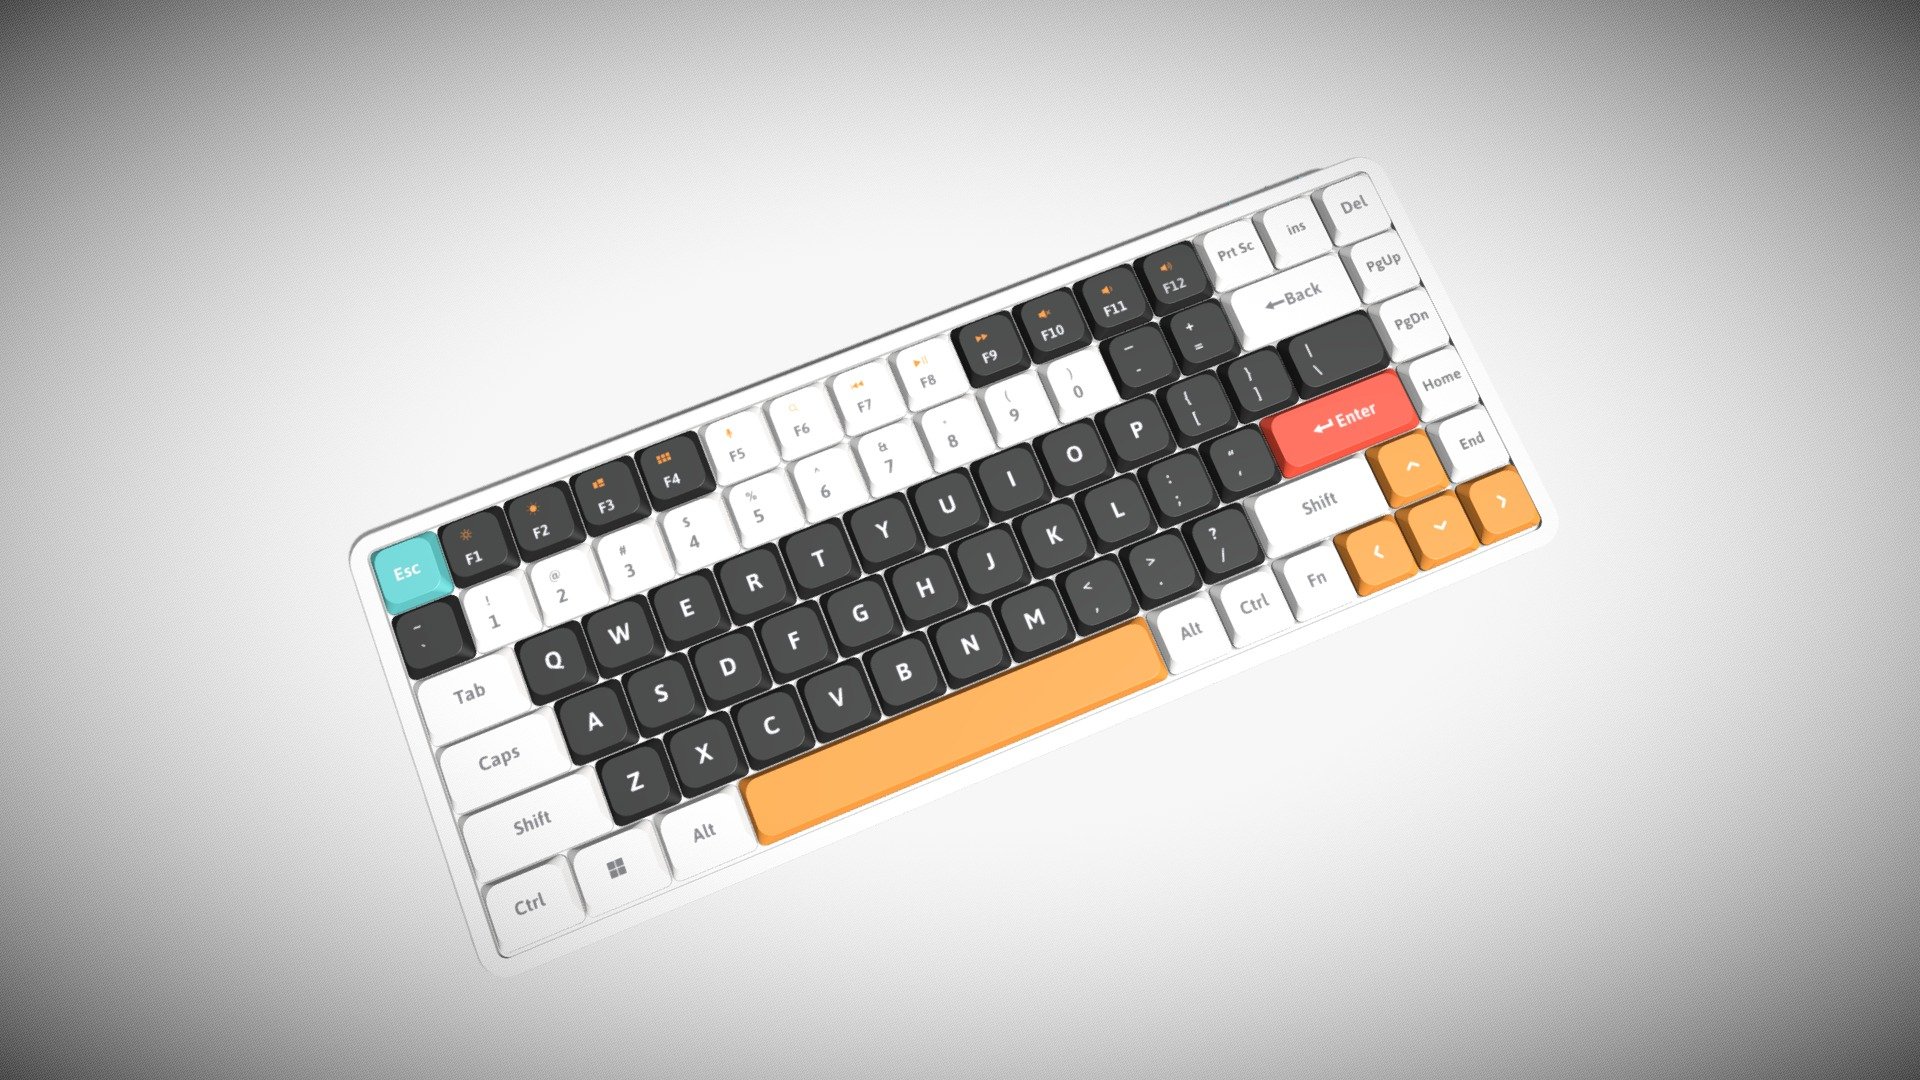 Detailed model of a white 75-Percent Layout Keyboard, modeled in Cinema 4D.The model was created using approximate real world dimensions.

The model has 48,919 polys and 49,084 vertices.

An additional file has been provided containing the original Cinema 4D project files with both standard and v-ray materials, textures and other 3d export files such as 3ds, fbx and obj 3d model